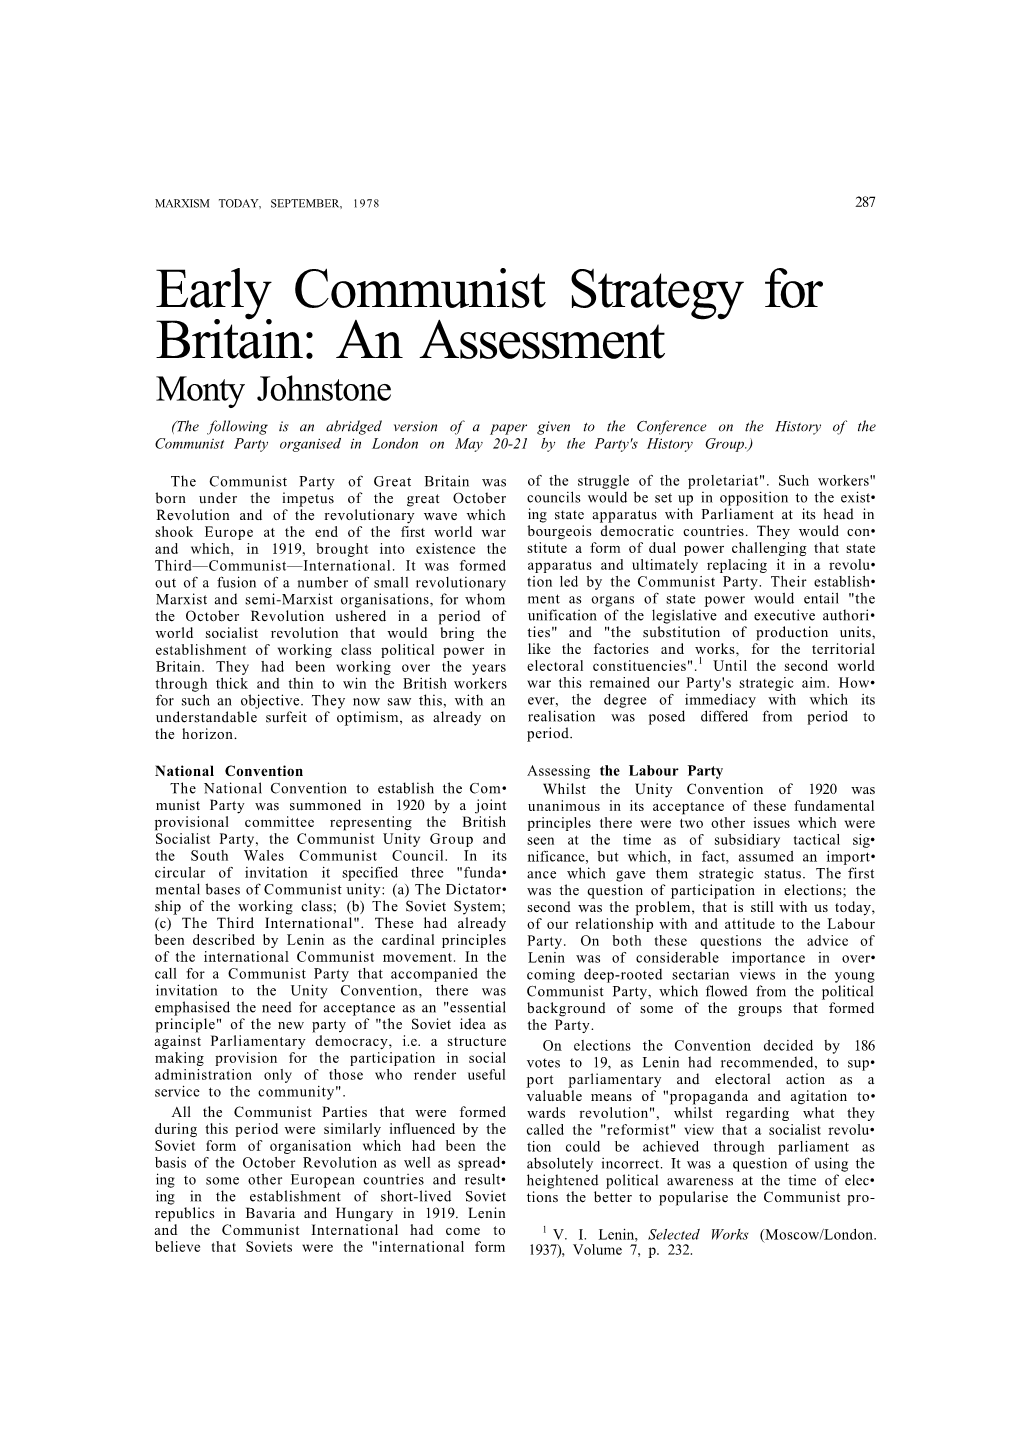 Early Communist Strategy for Britain: an Assessment